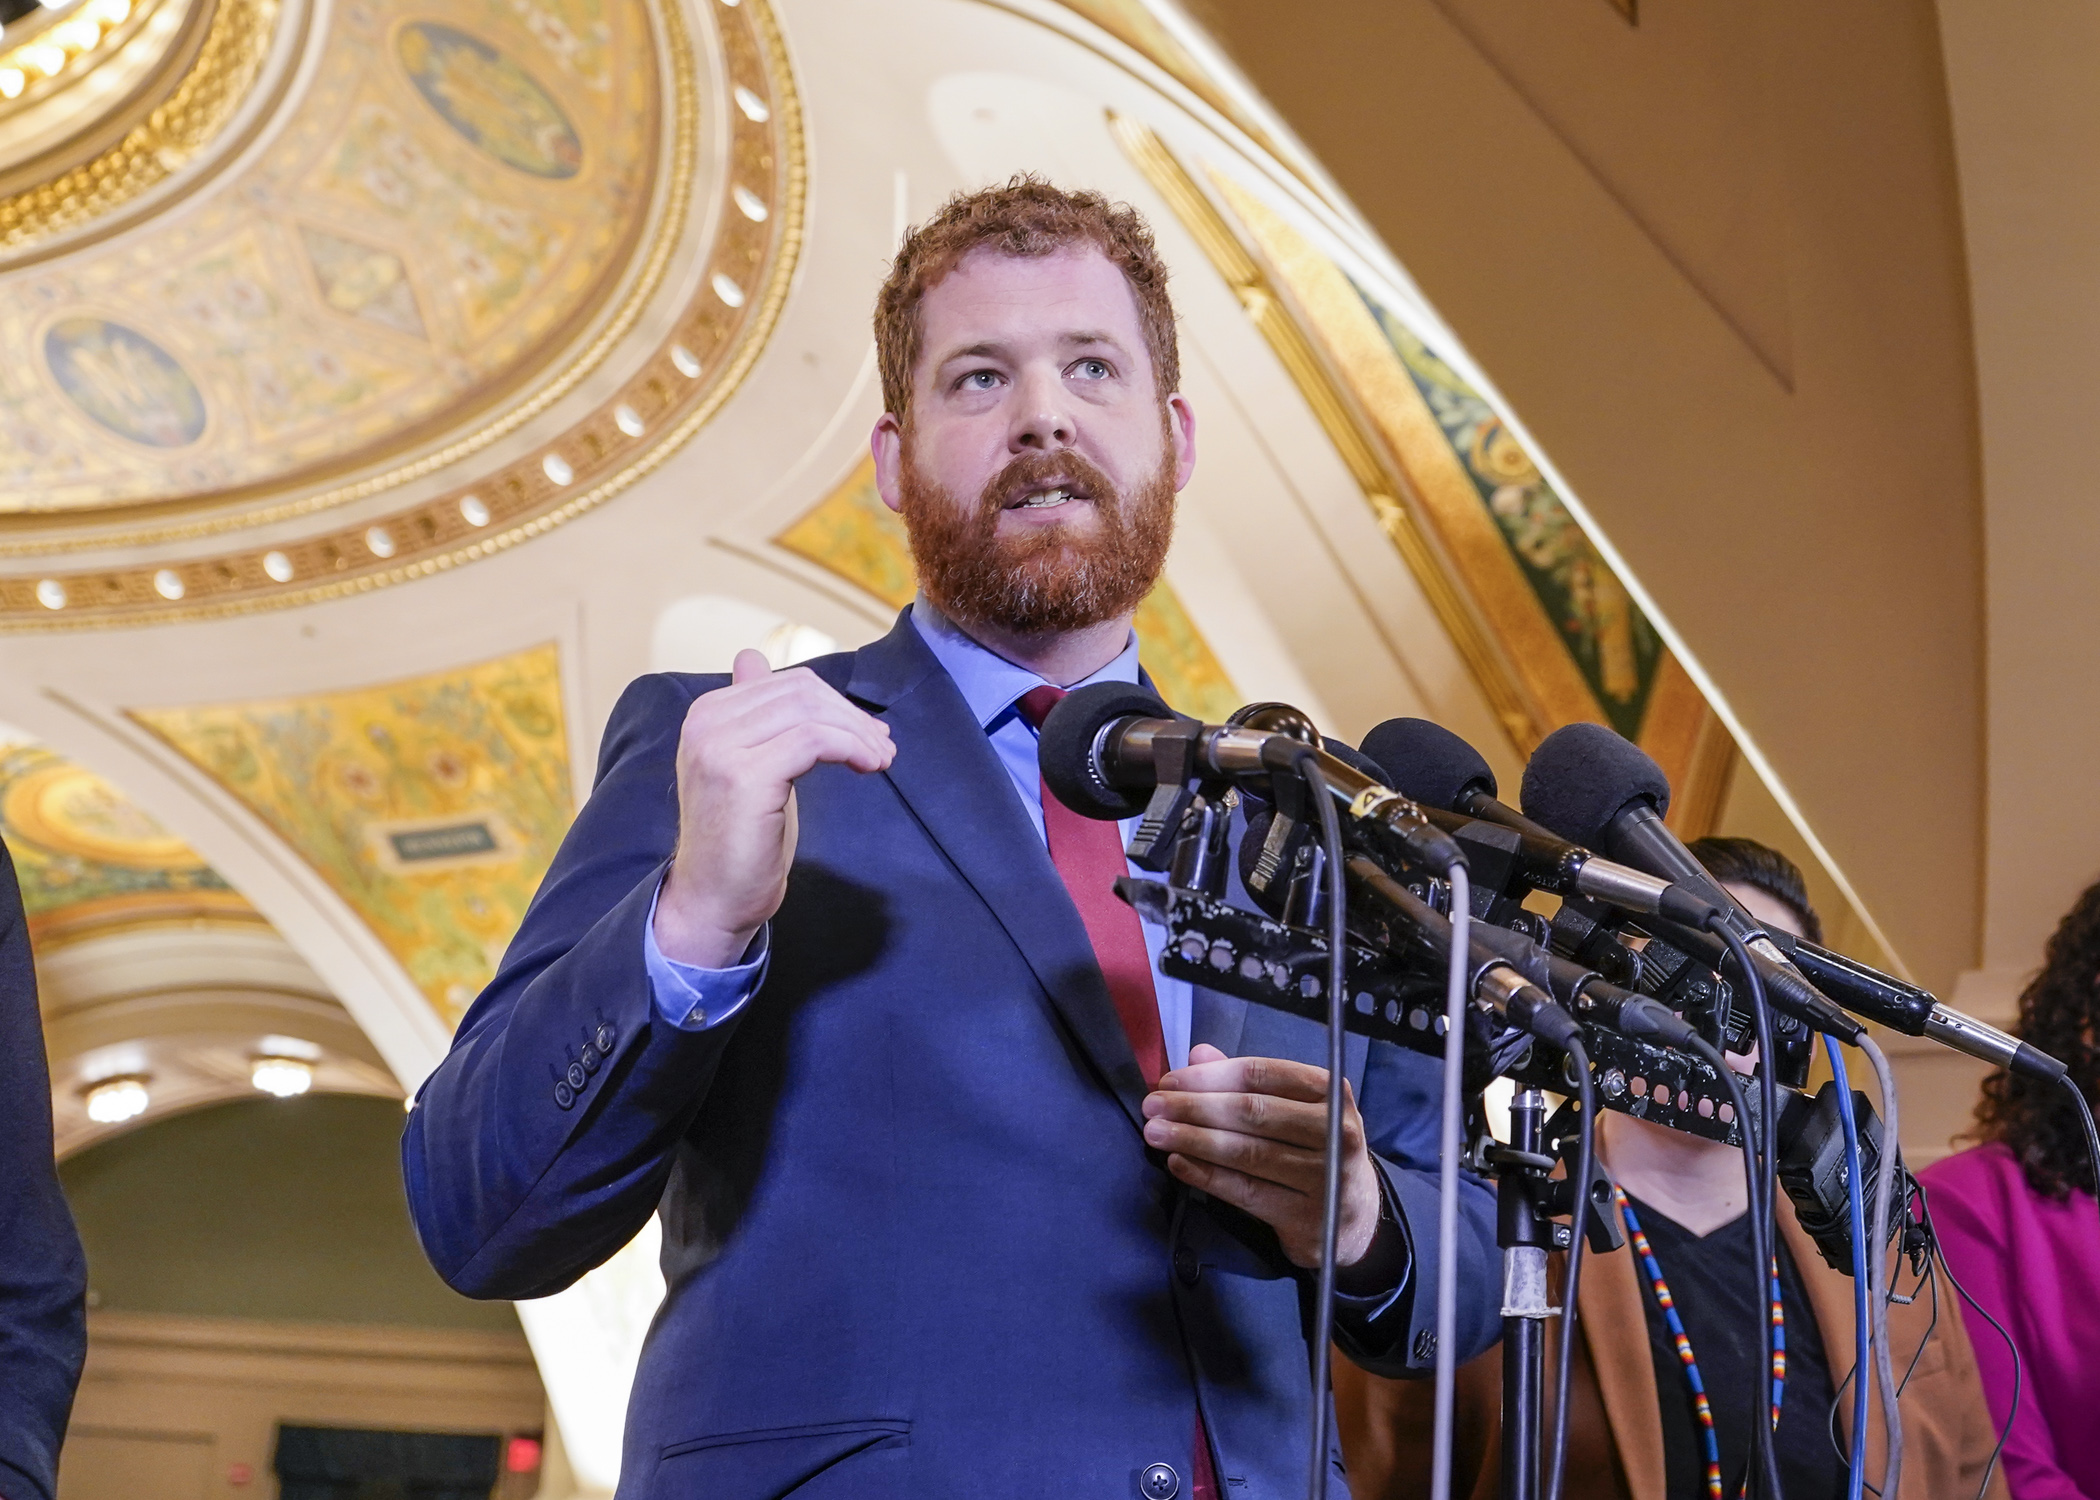 Rep. Zack Stephenson fields questions from the media April 24 ahead of House Floor debate on HF100, a bill he sponsors that would legalize recreational marijuana for adults in Minnesota. (Photo by Catherine Davis)